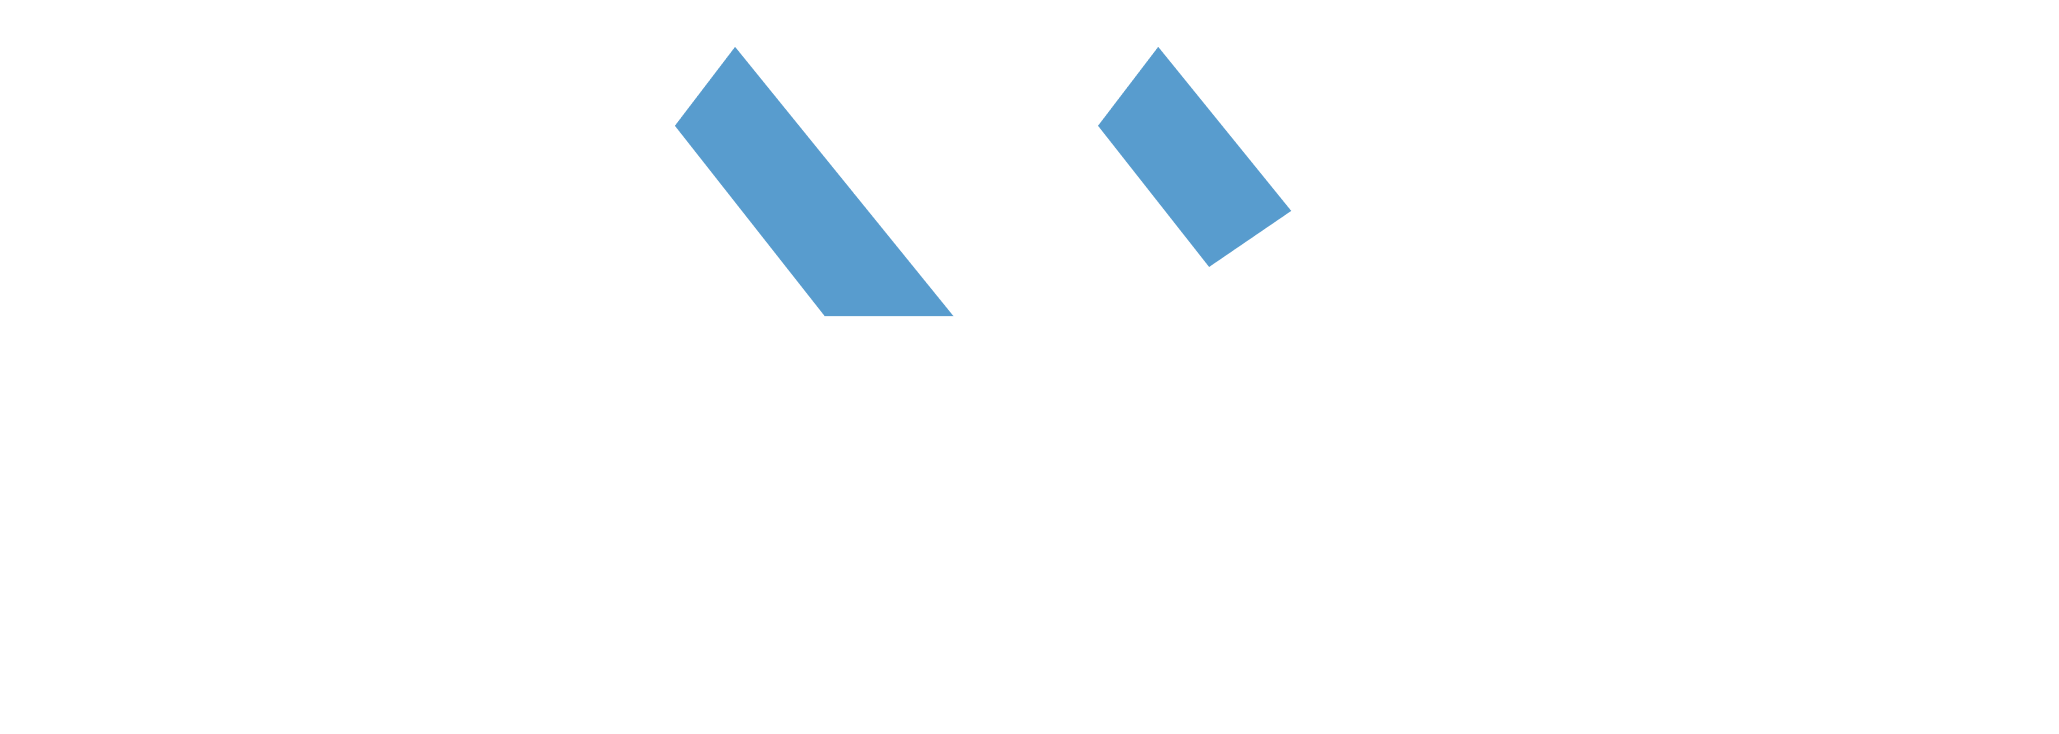 Professional Home Painting Company in Midwest USA Logo